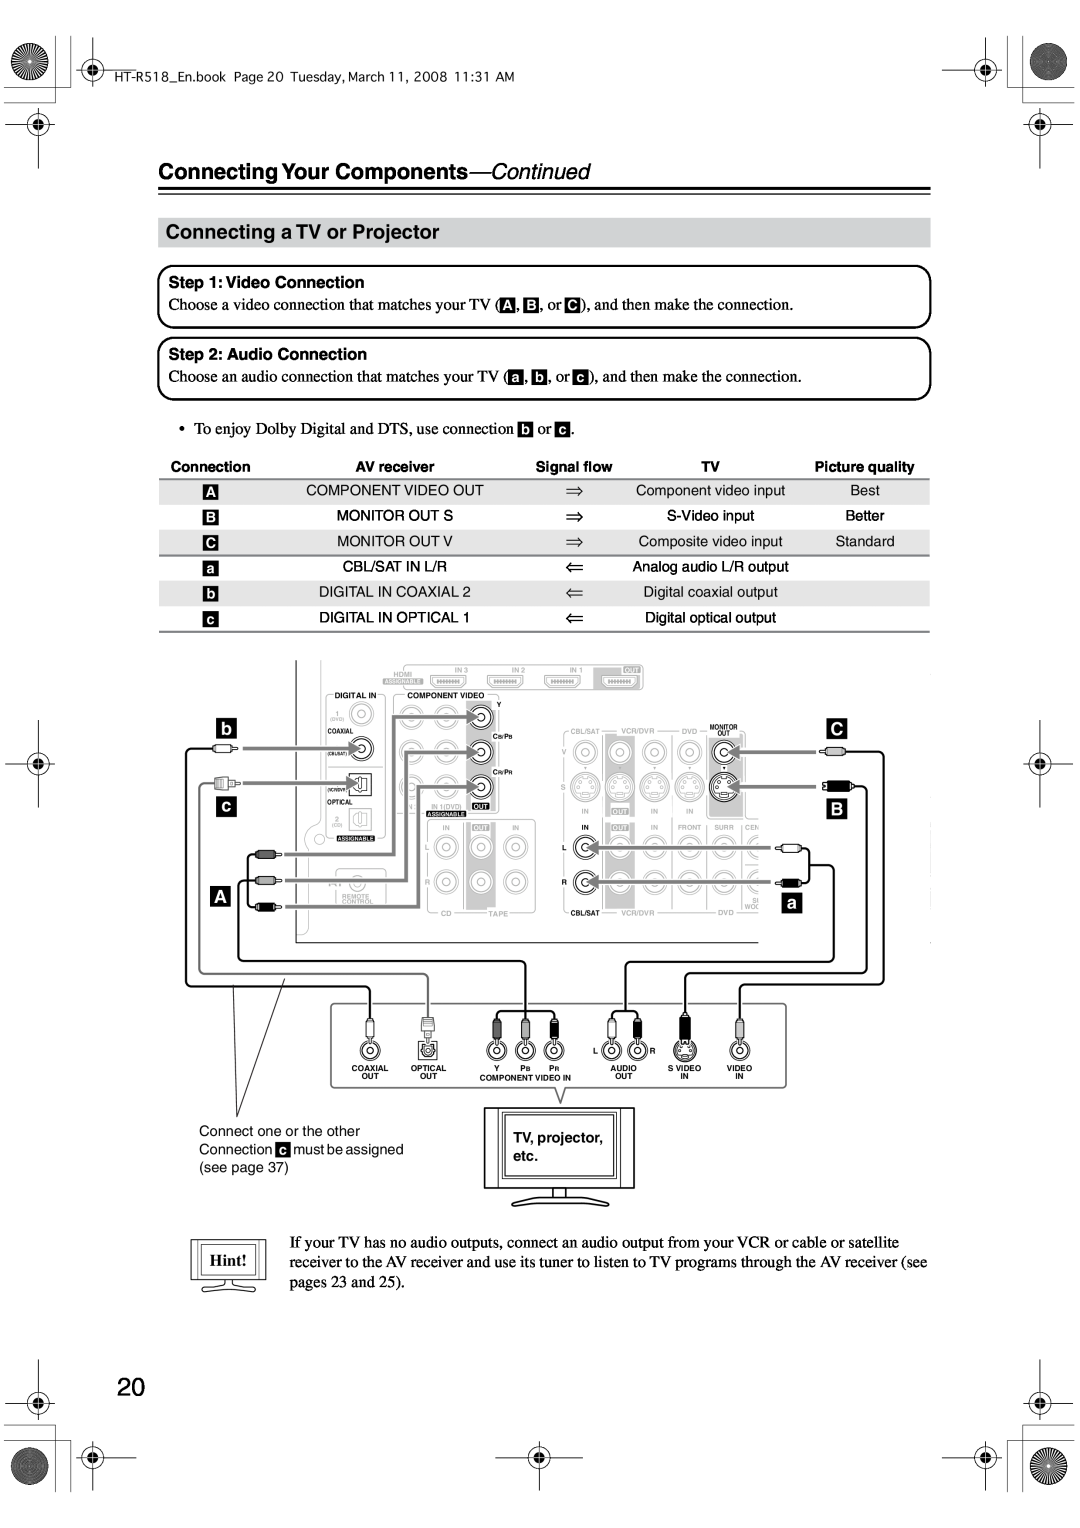 Onkyo HT-R518 instruction manual Connecting a TV or Projector, b c A, Connecting Your Components-Continued, Hint 